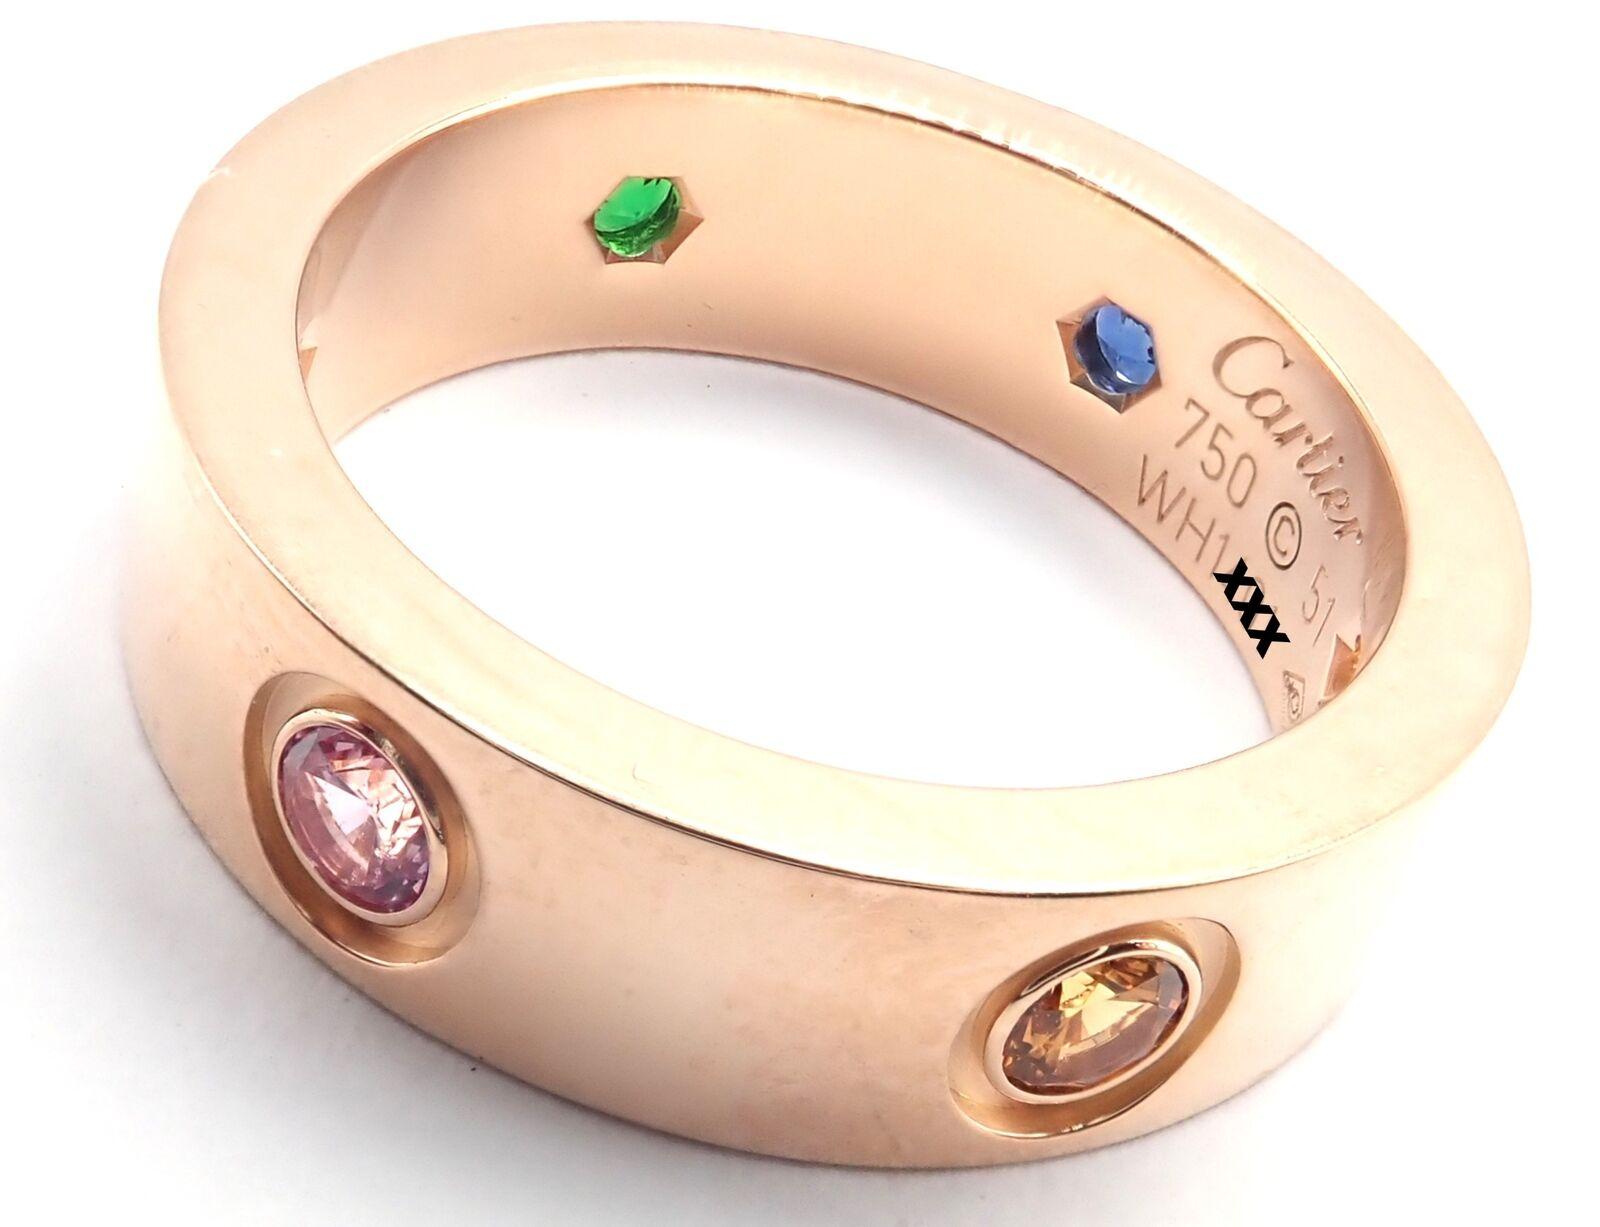 18k Rose Gold LOVE Multi-Gem Band Ring by Cartier. 
With 1 round yellow sapphire, 1 round pink sapphires, 1 round blue sapphire, 1 orange garnet, 1 round amethyst.
This ring comes with service paper from Cartier store.
Details: 
Band Width: